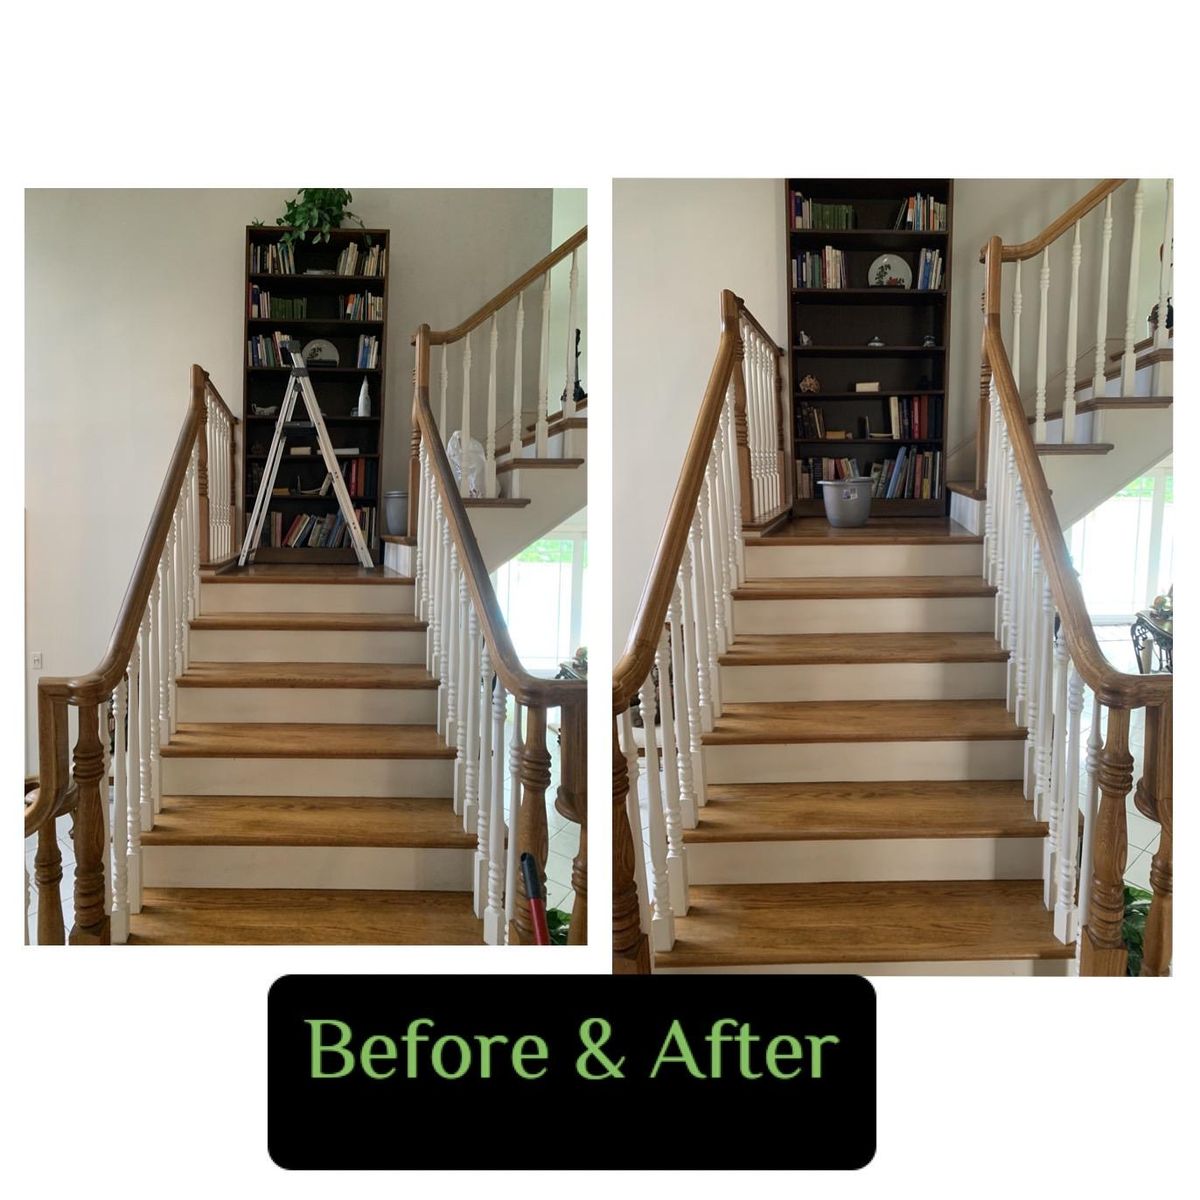 Deep Cleaning for BCB Cleaning Services in Corona, CA